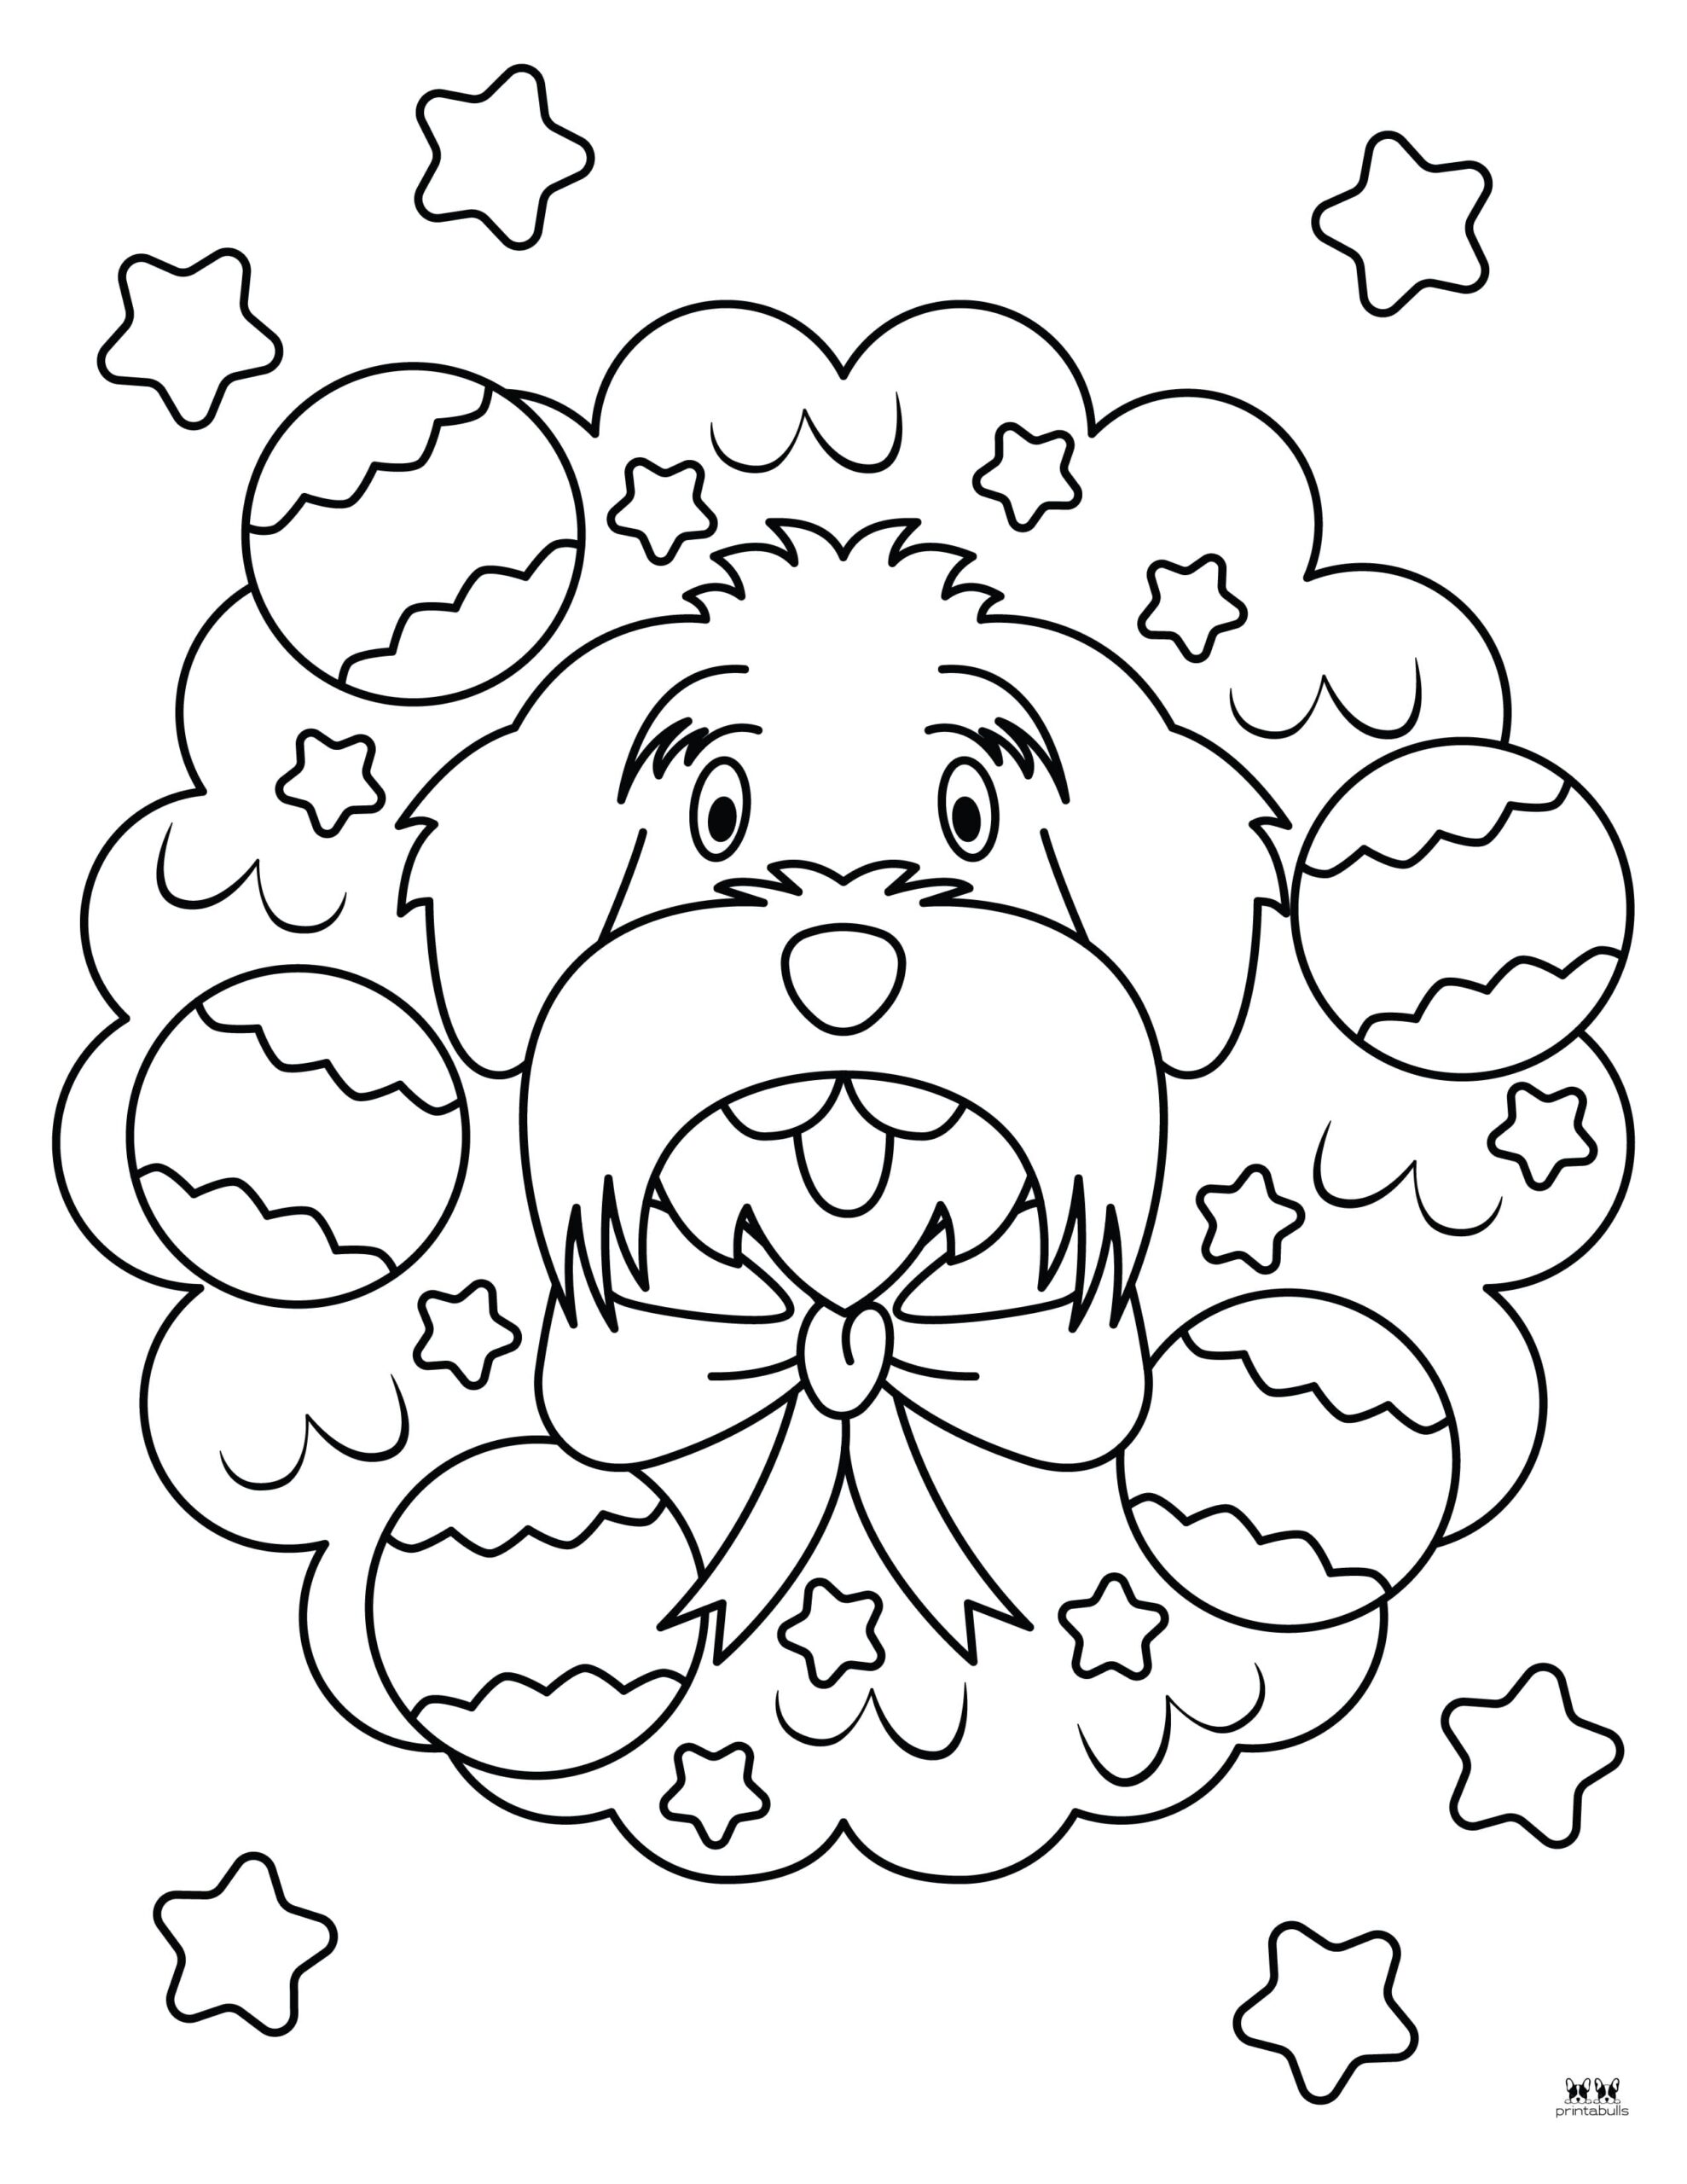 Christmas Wreath Coloring Pages - 25 FREE Pages | Printabulls